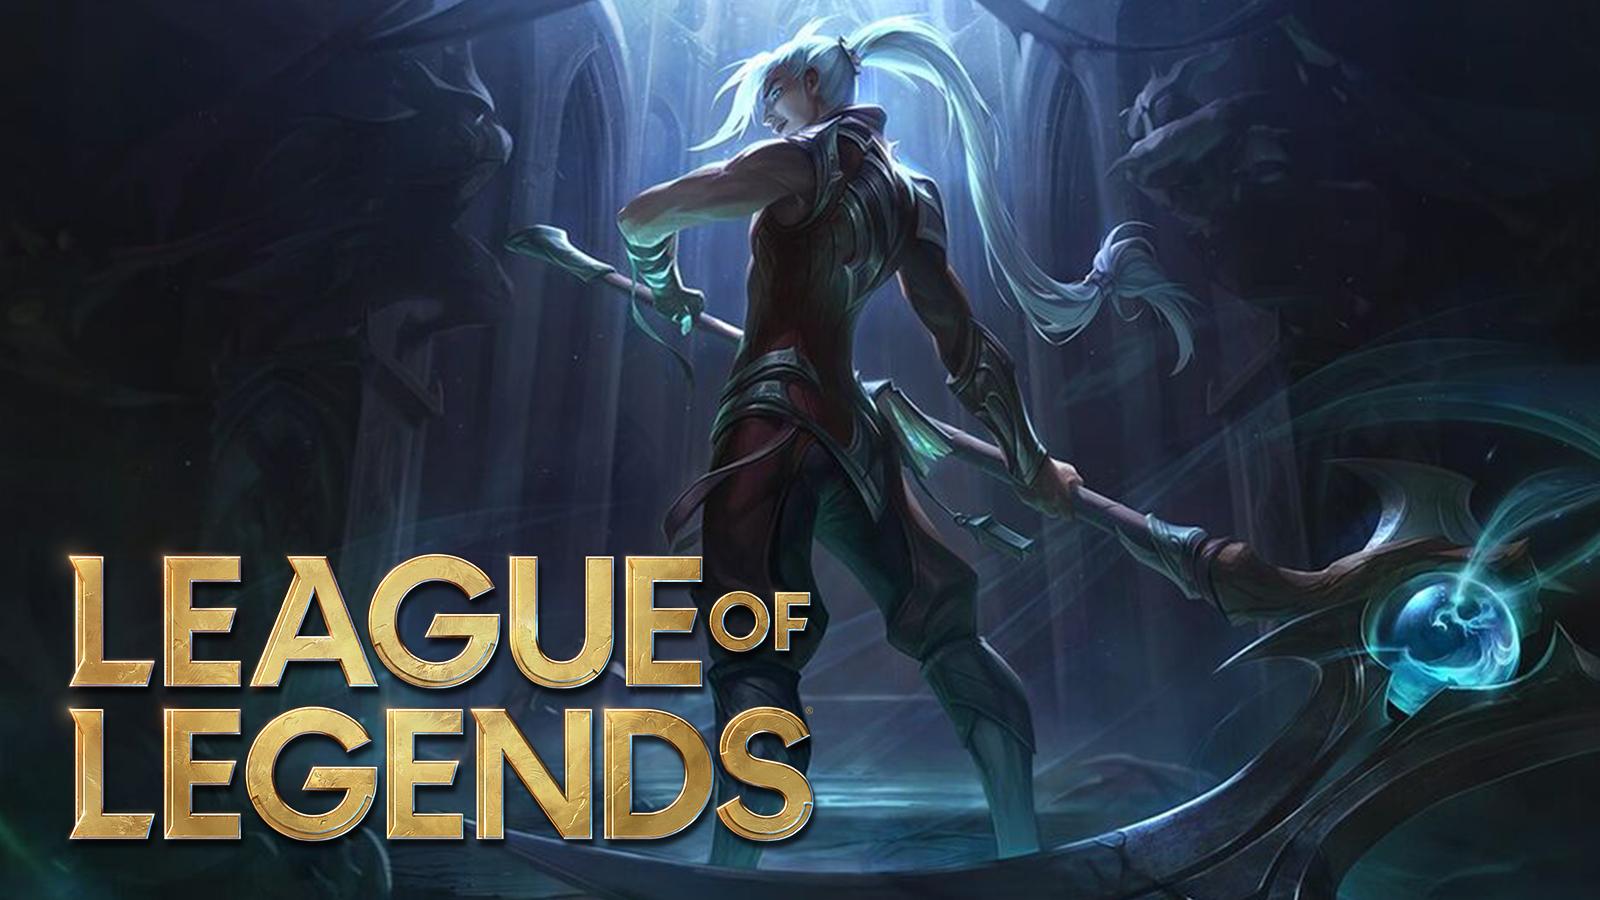 Kayn looms over League of Legends patch 10.25b.